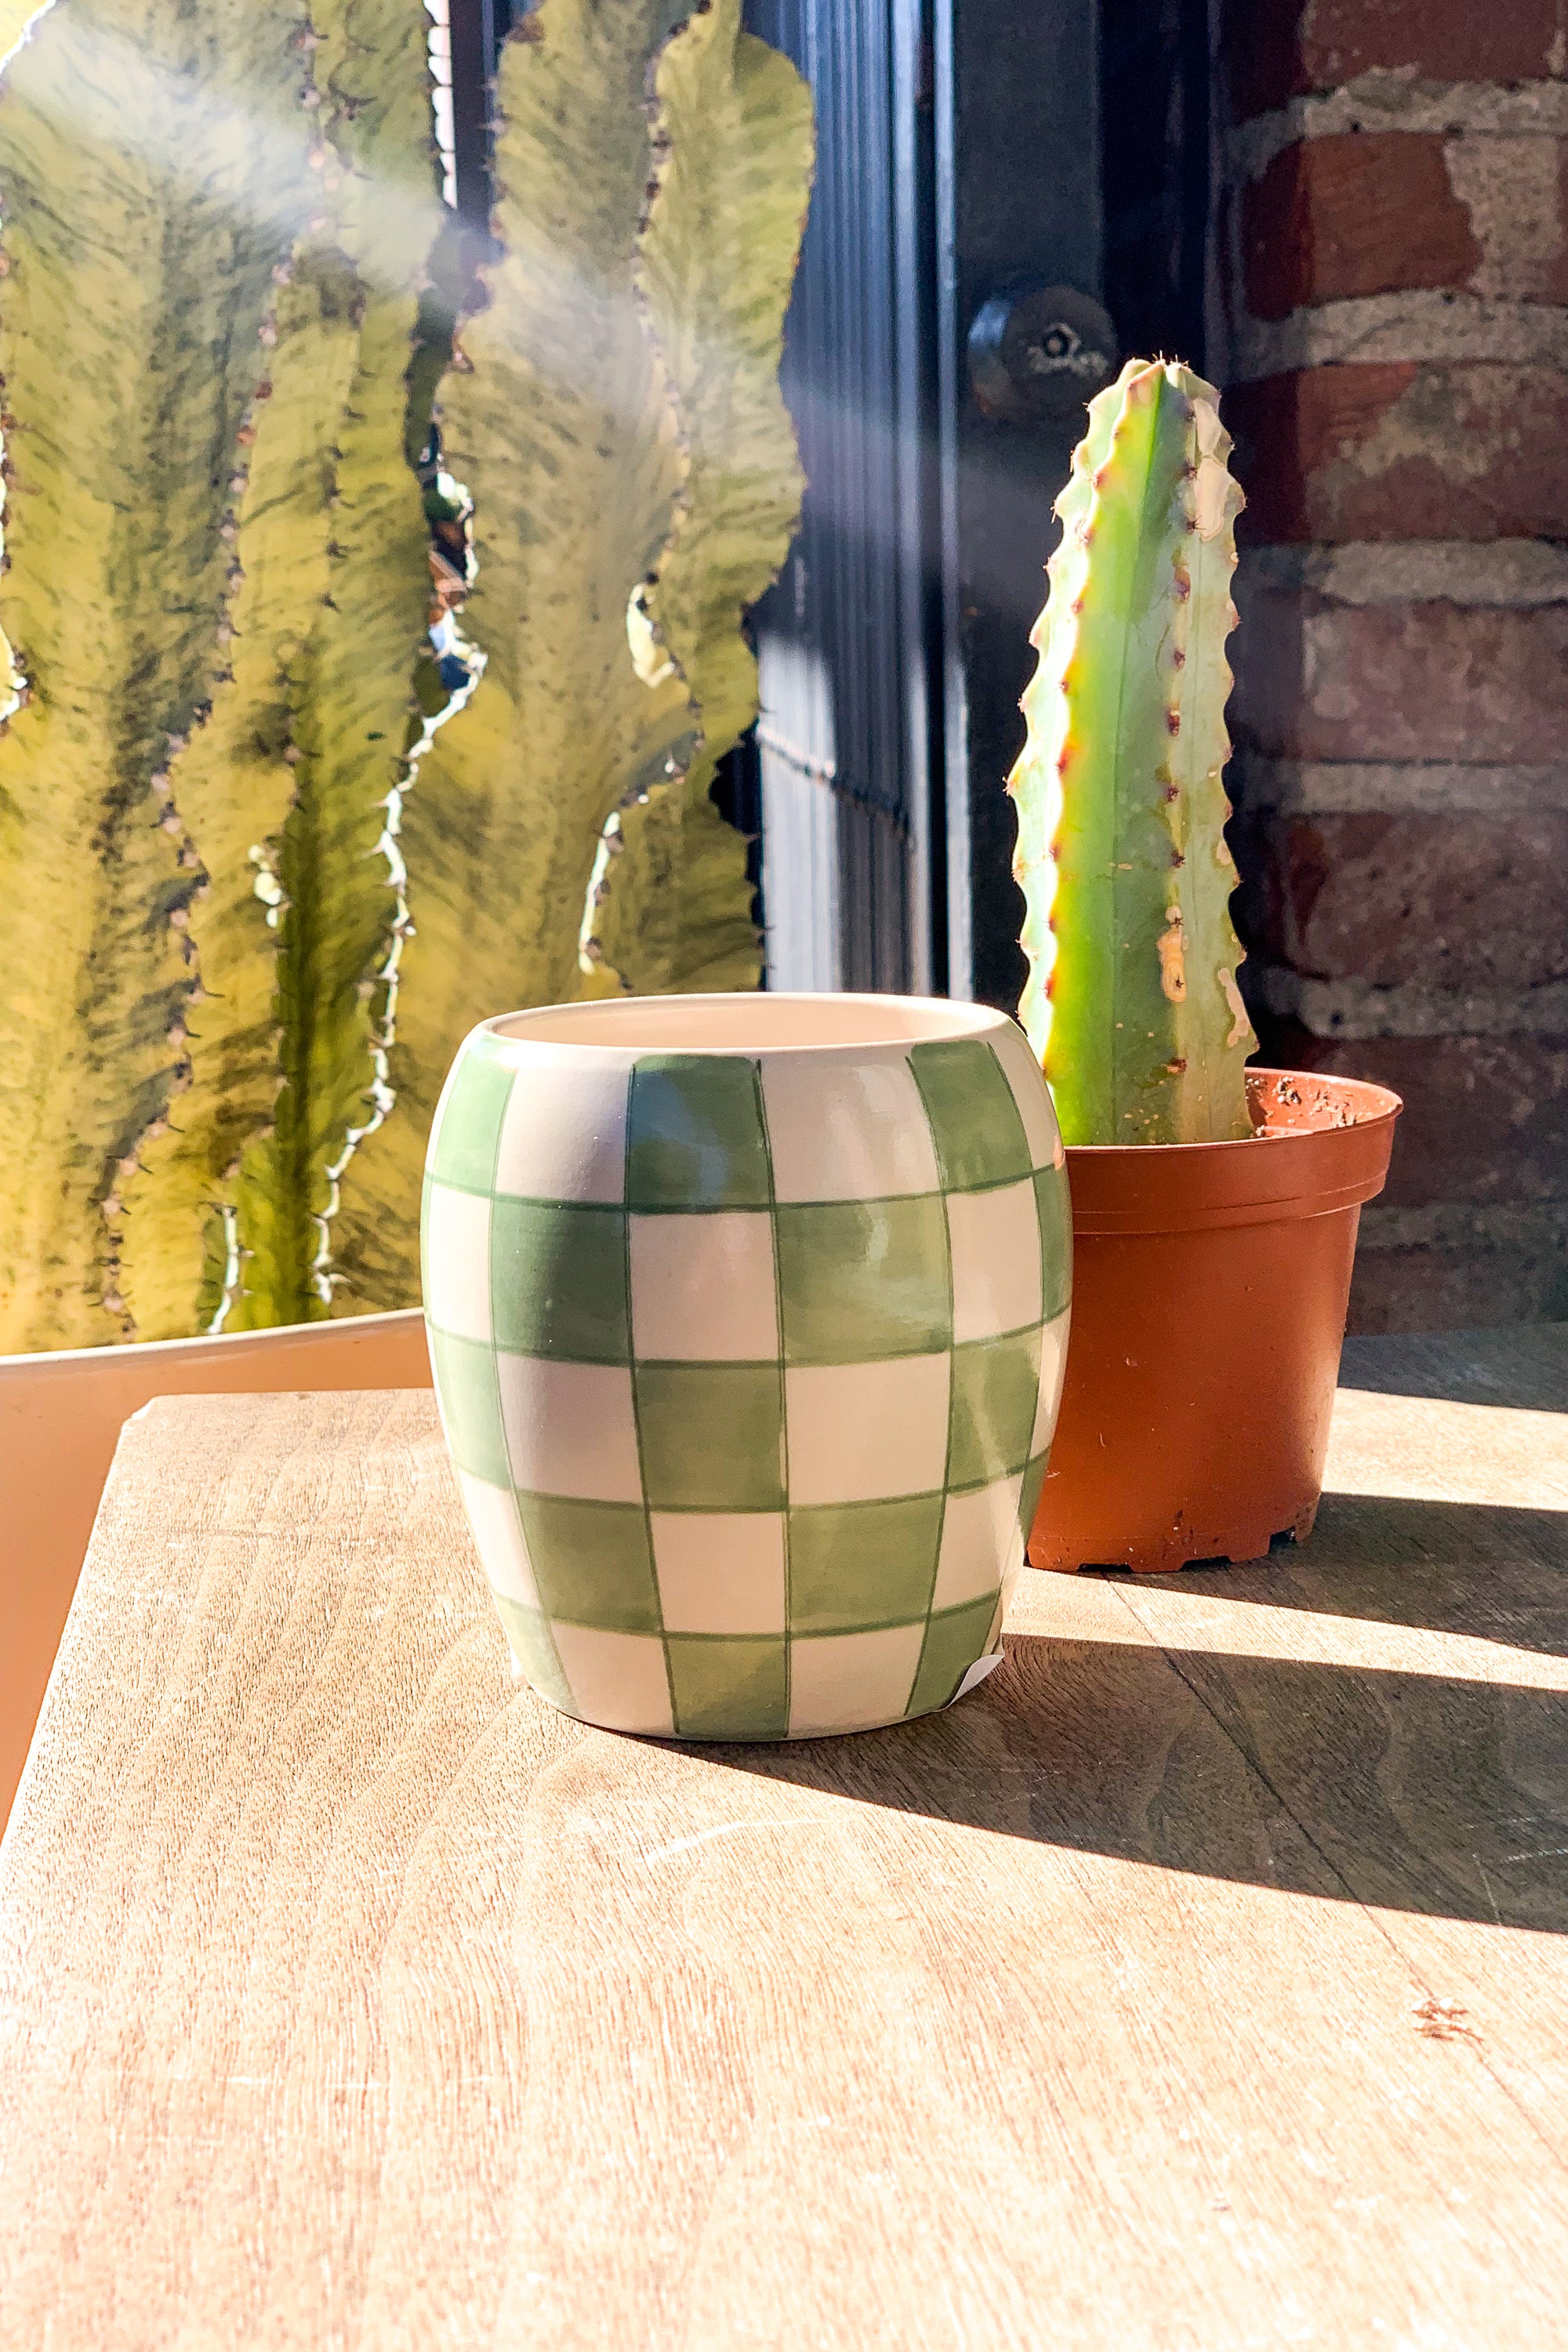 Check Mate Porcelain Vessel Candle - The Canyon